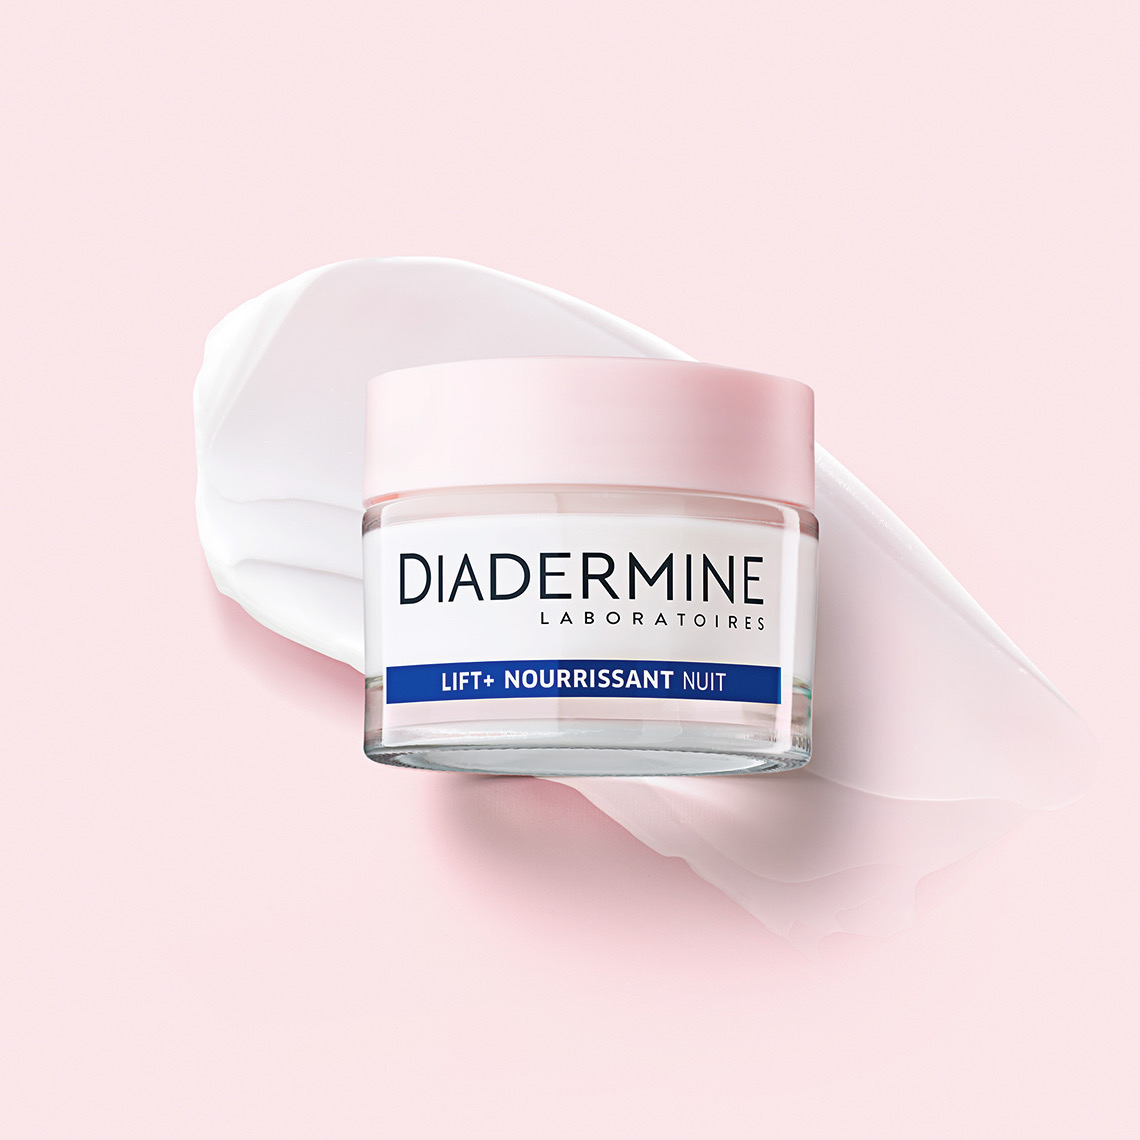 Diadermine Face Cream with Texture • Marc Wuchner • Cosmetic and Texture Photographer